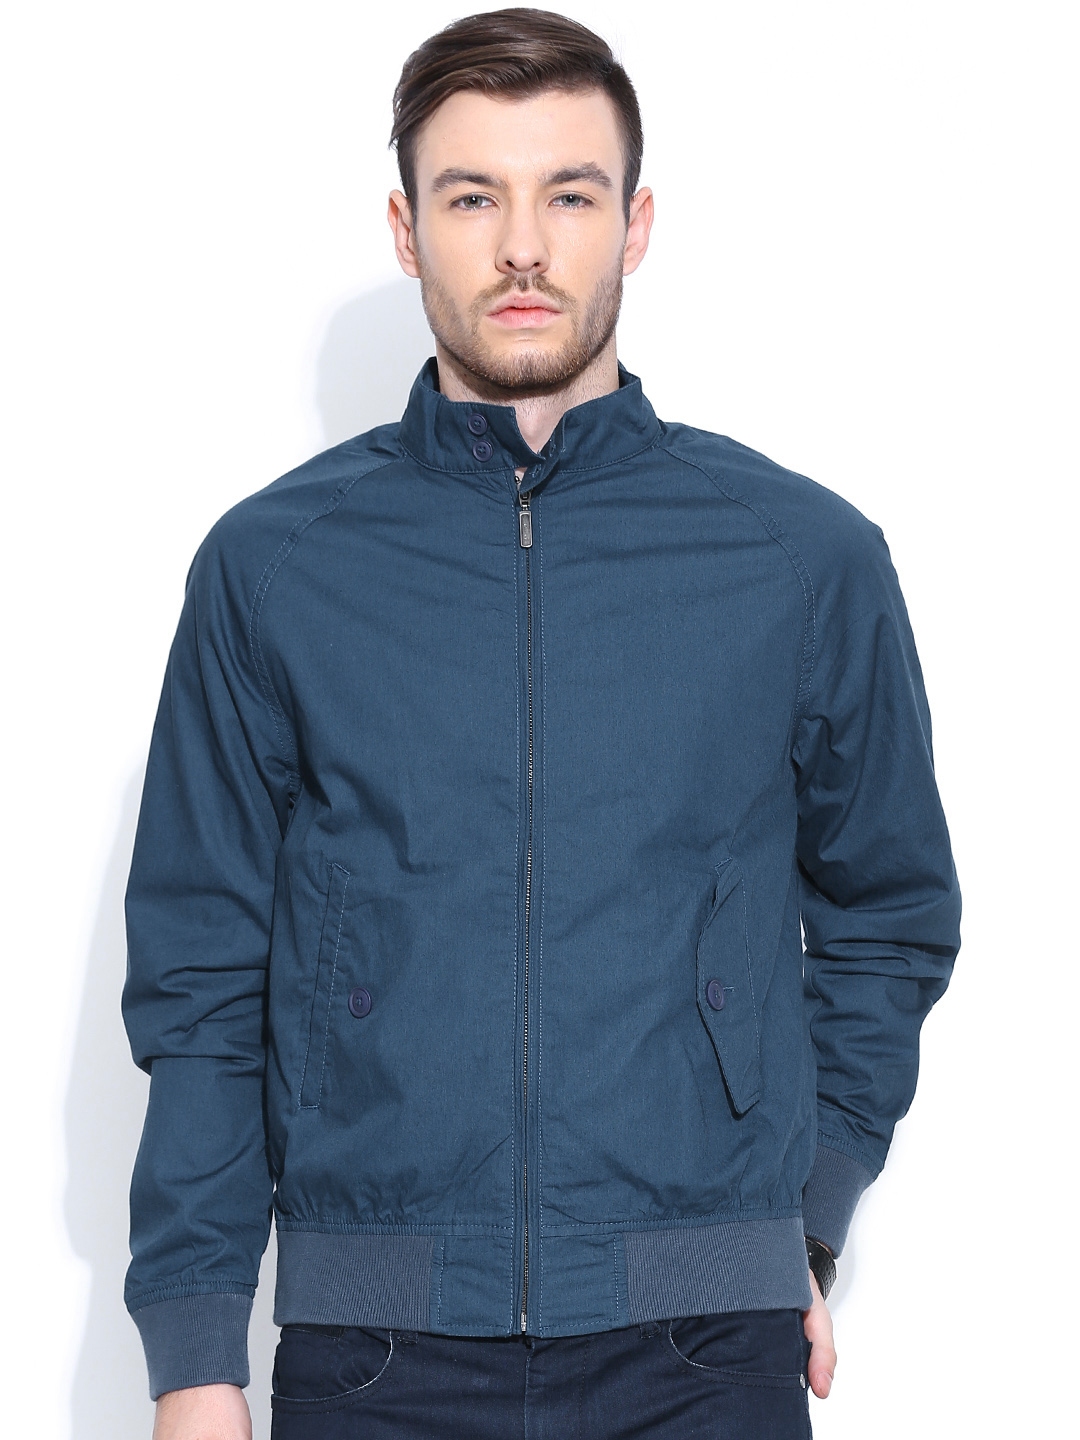 Buy United Colors Of Benetton Navy Jacket - Jackets for Men 565111 | Myntra